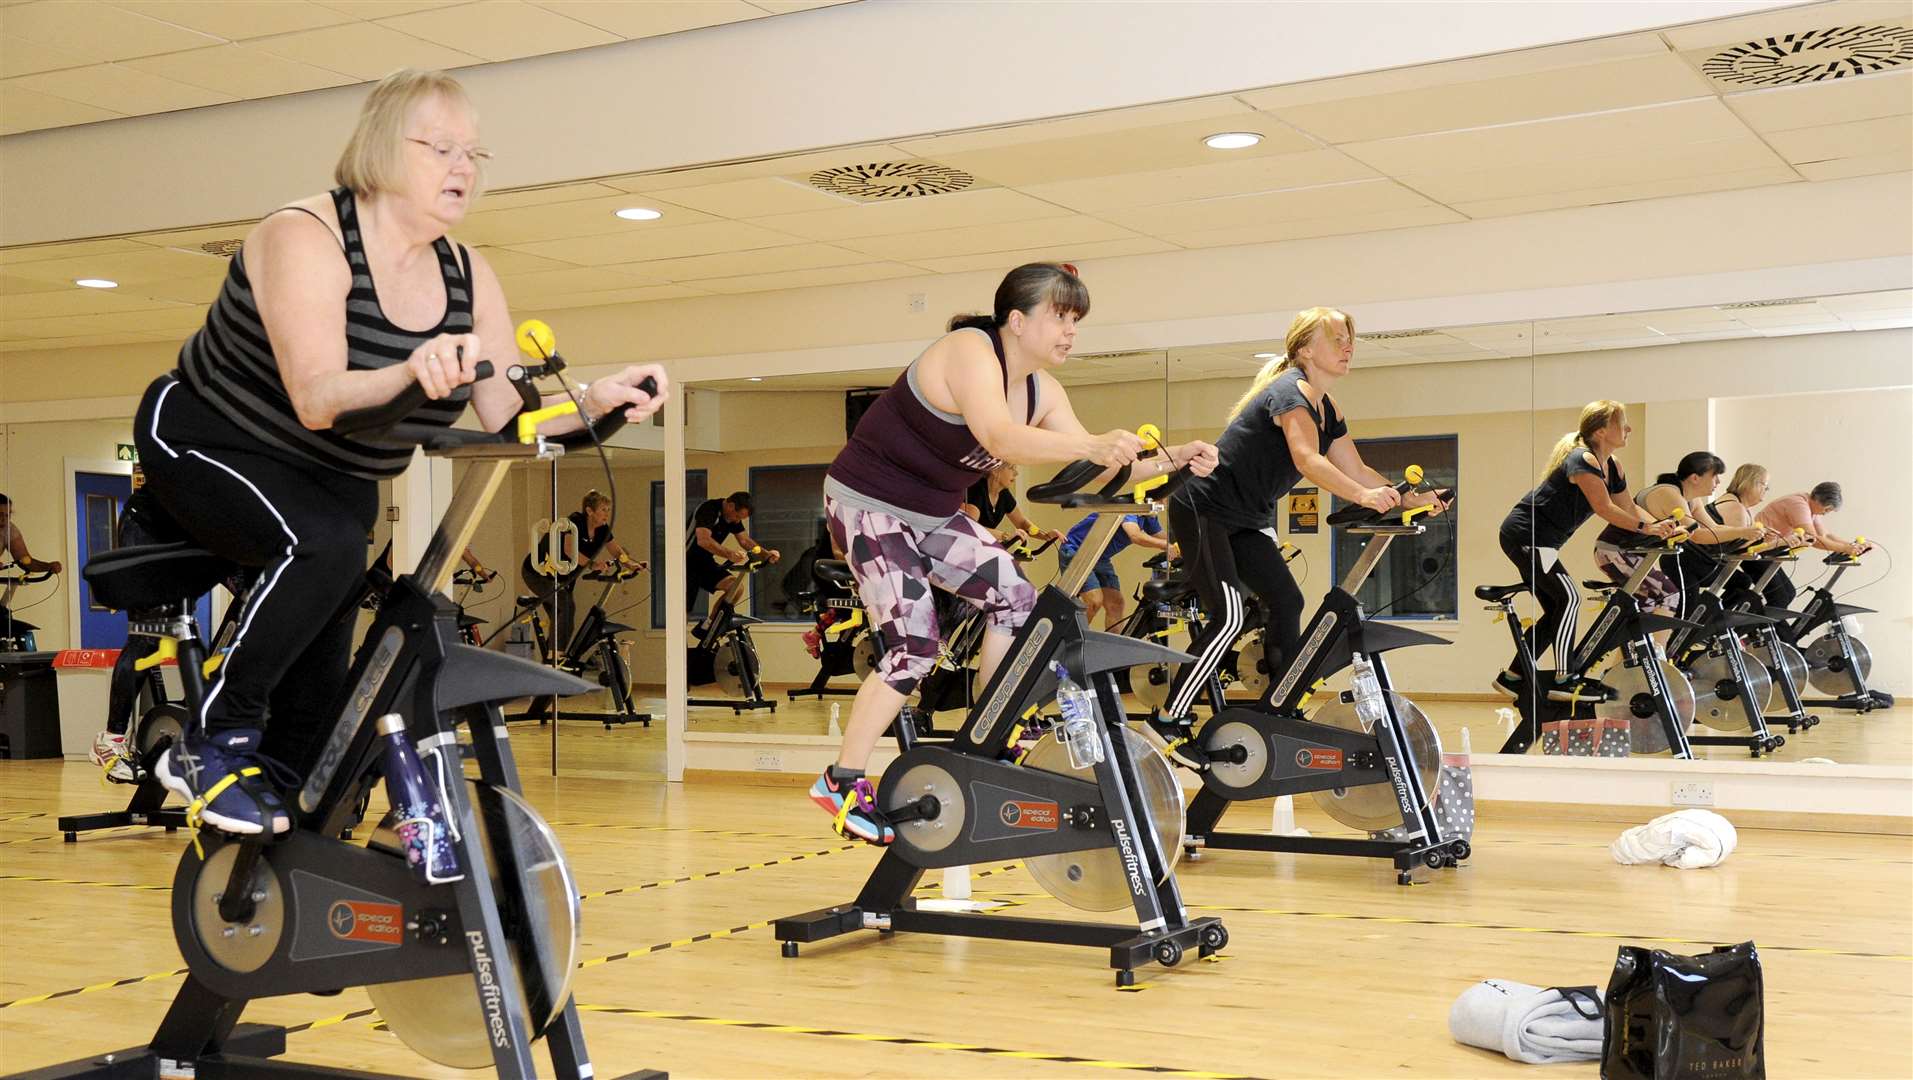 An indoor cycling class at Moray Leisure Centre.